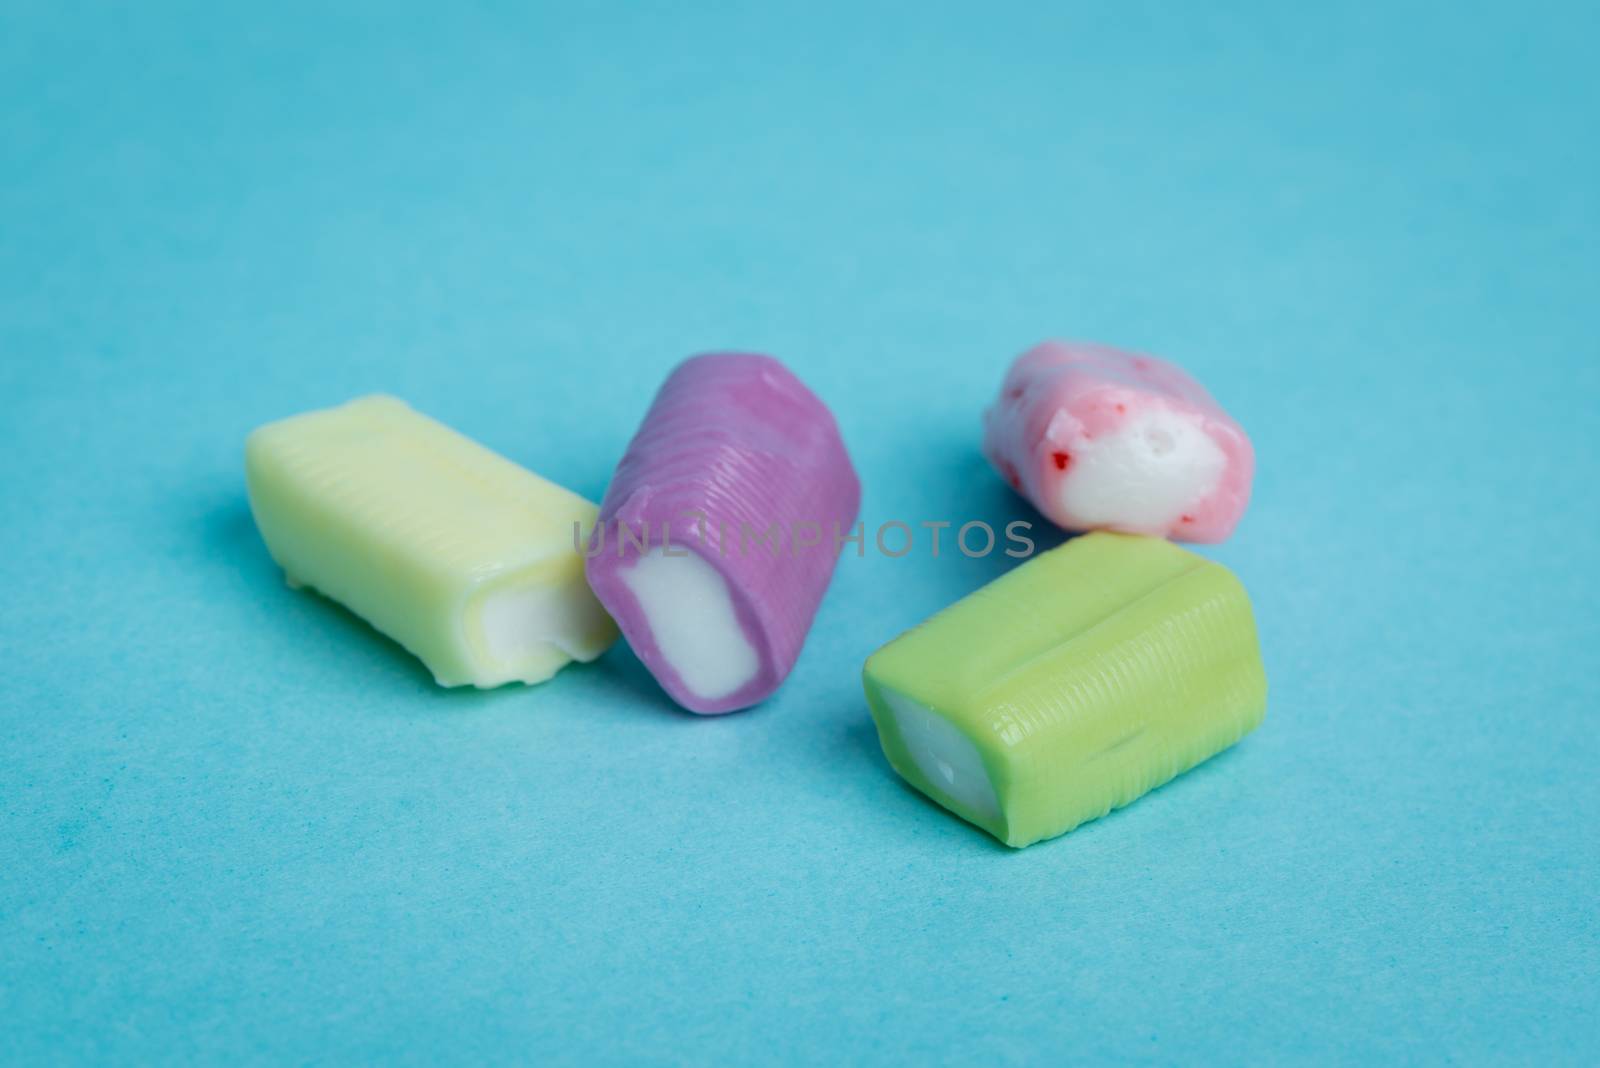 Strawberry, grape, banana and green apple chewy candies on a blue background.